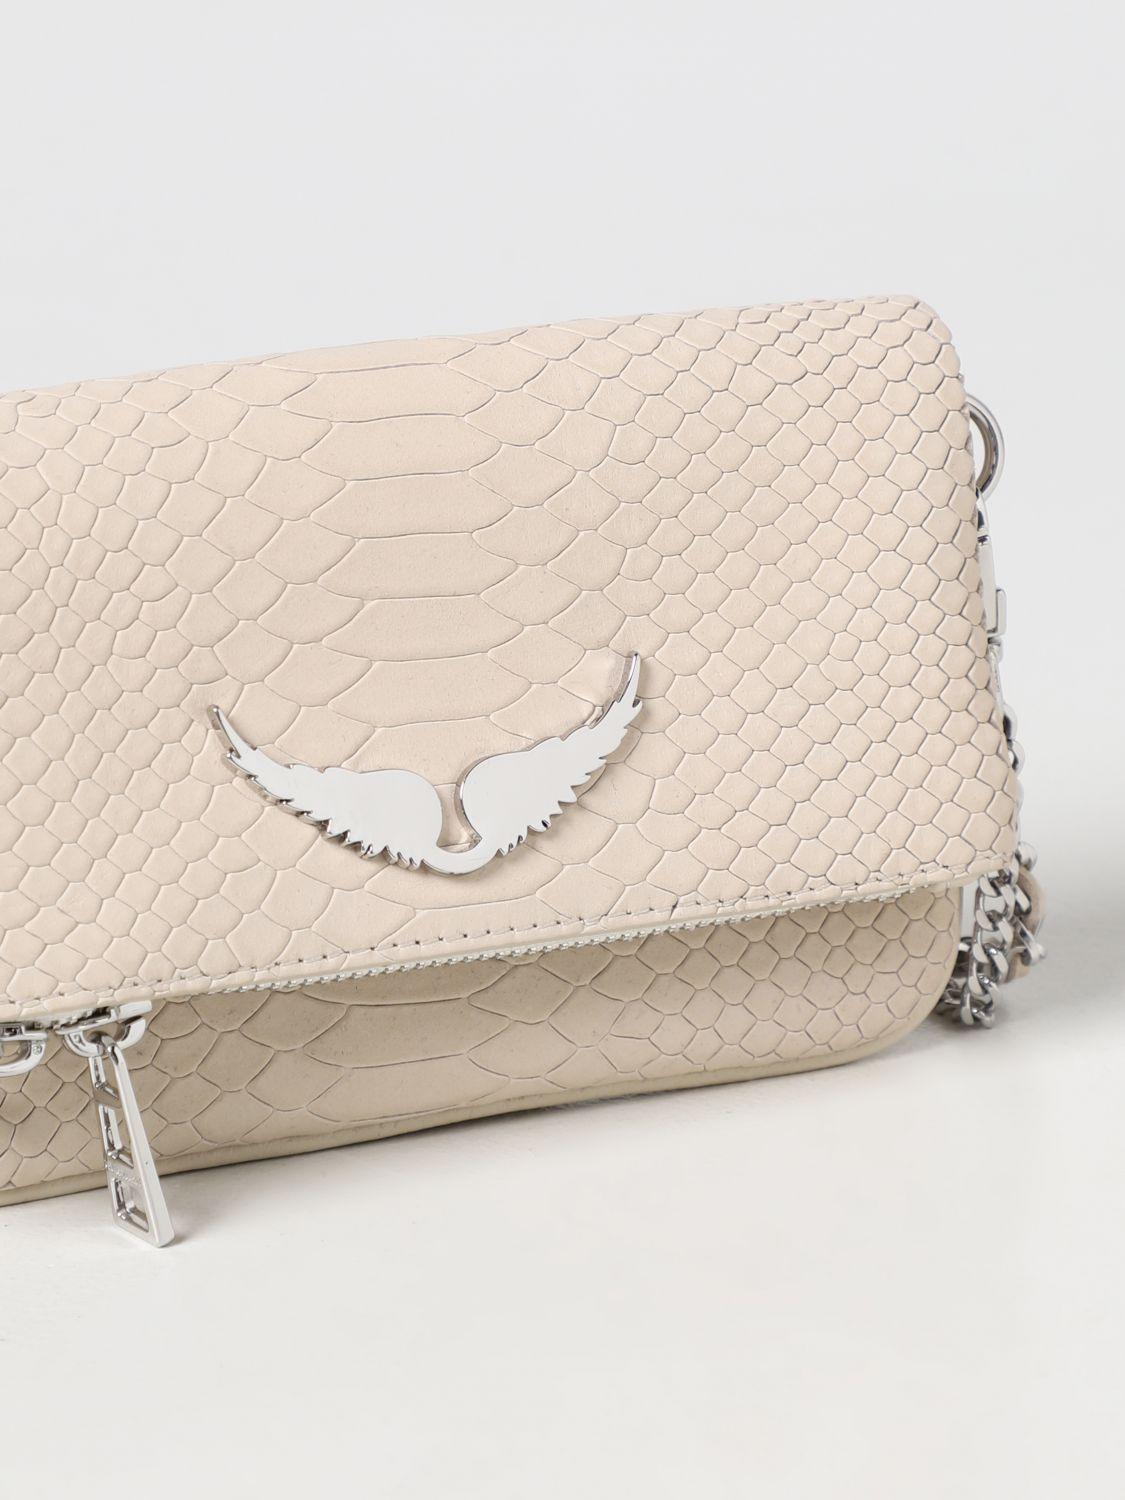 Zadig & Voltaire Mini Bag in Natural | Lyst